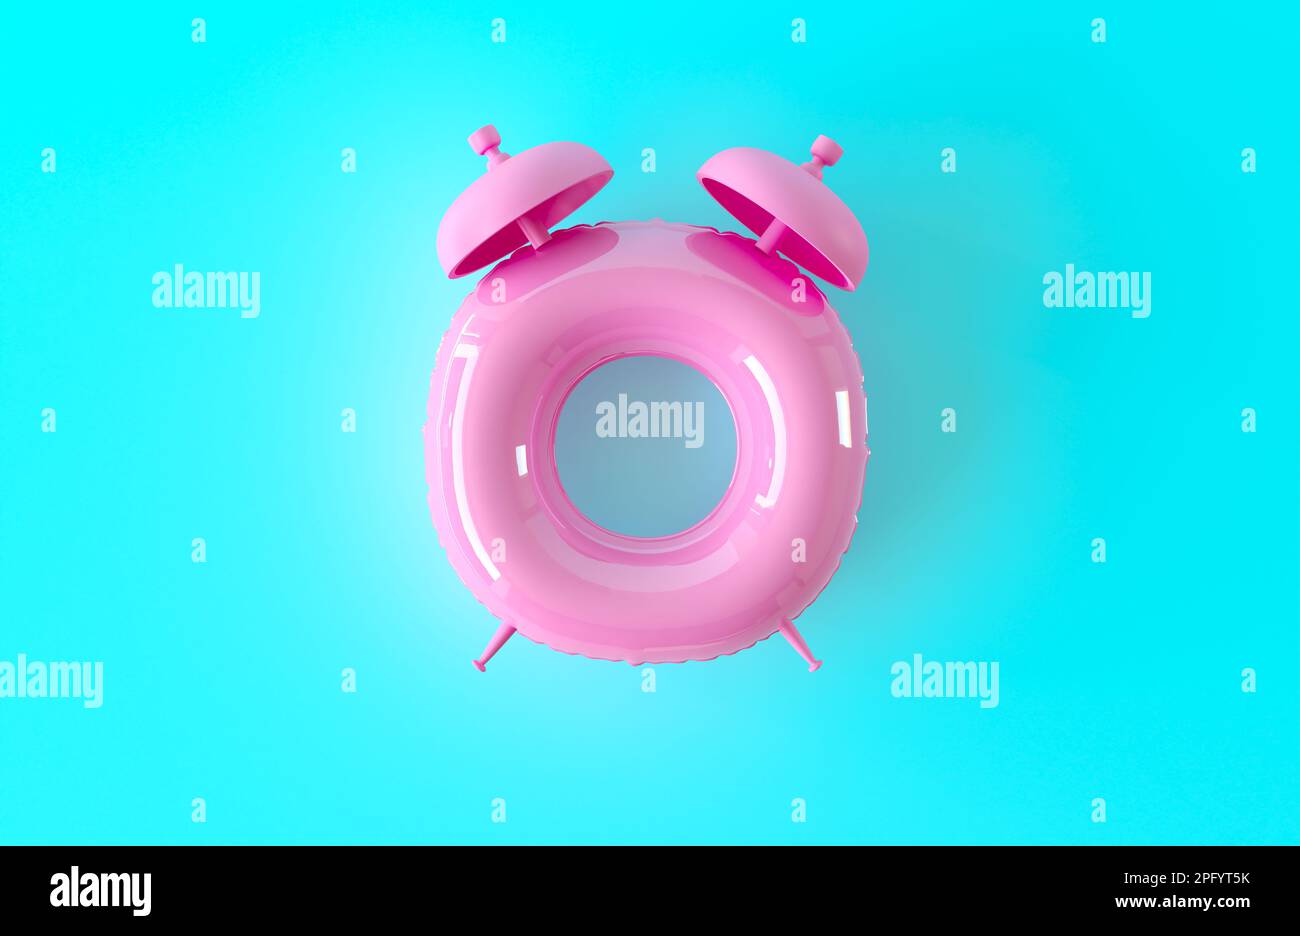 Clock ring top view on blue background. Alarm clock - pink inflatable circle. Summer time concept. Beach holidays, summer fun creative idea. 3d render Stock Photo